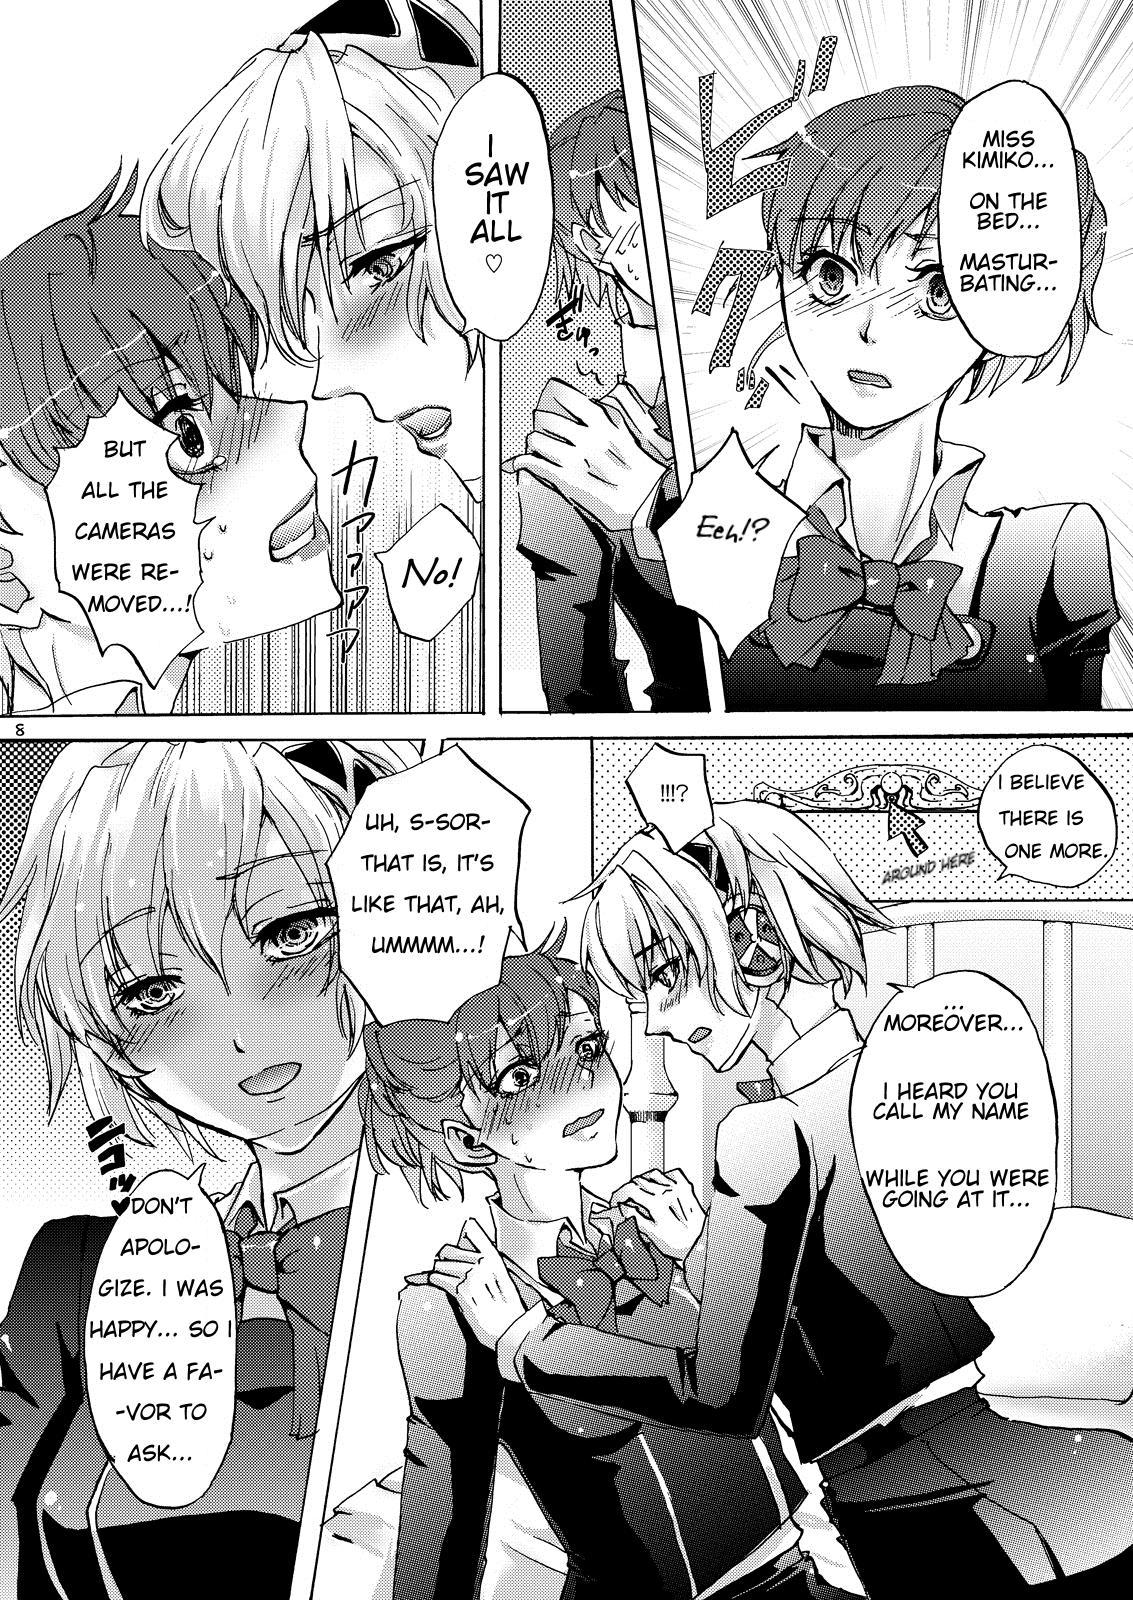 Muscle AIGIS! STRIKE! - Persona 3 Freaky - Page 7